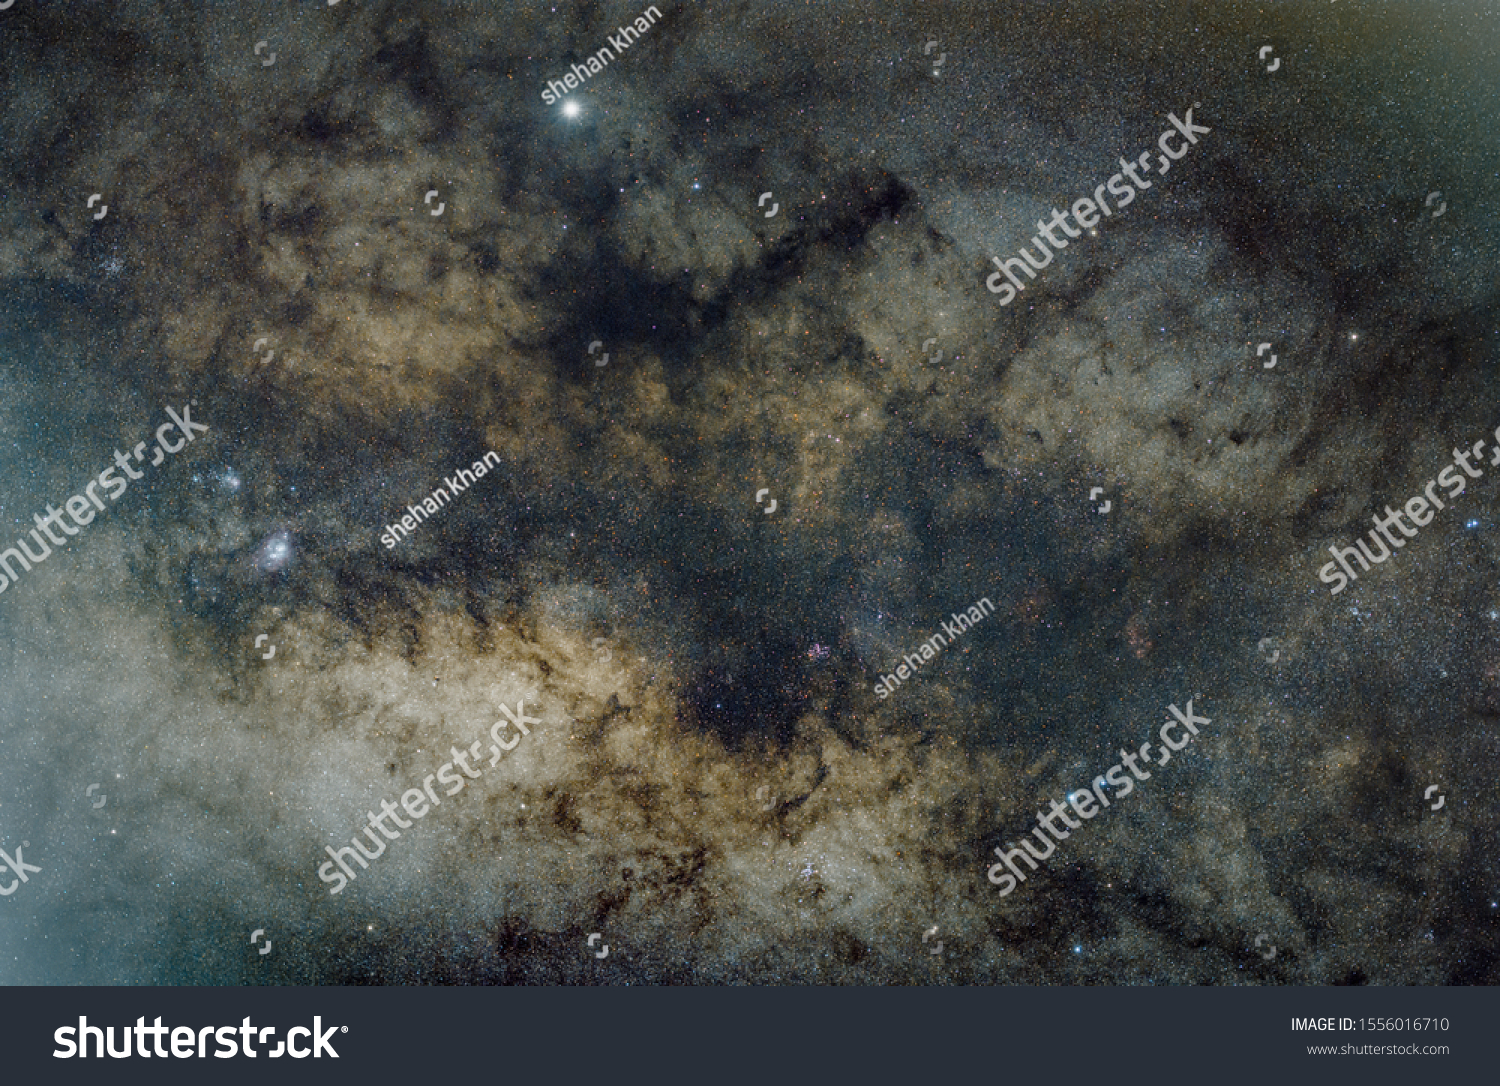 Our Center Of Milky Way Galaxy #1556016710